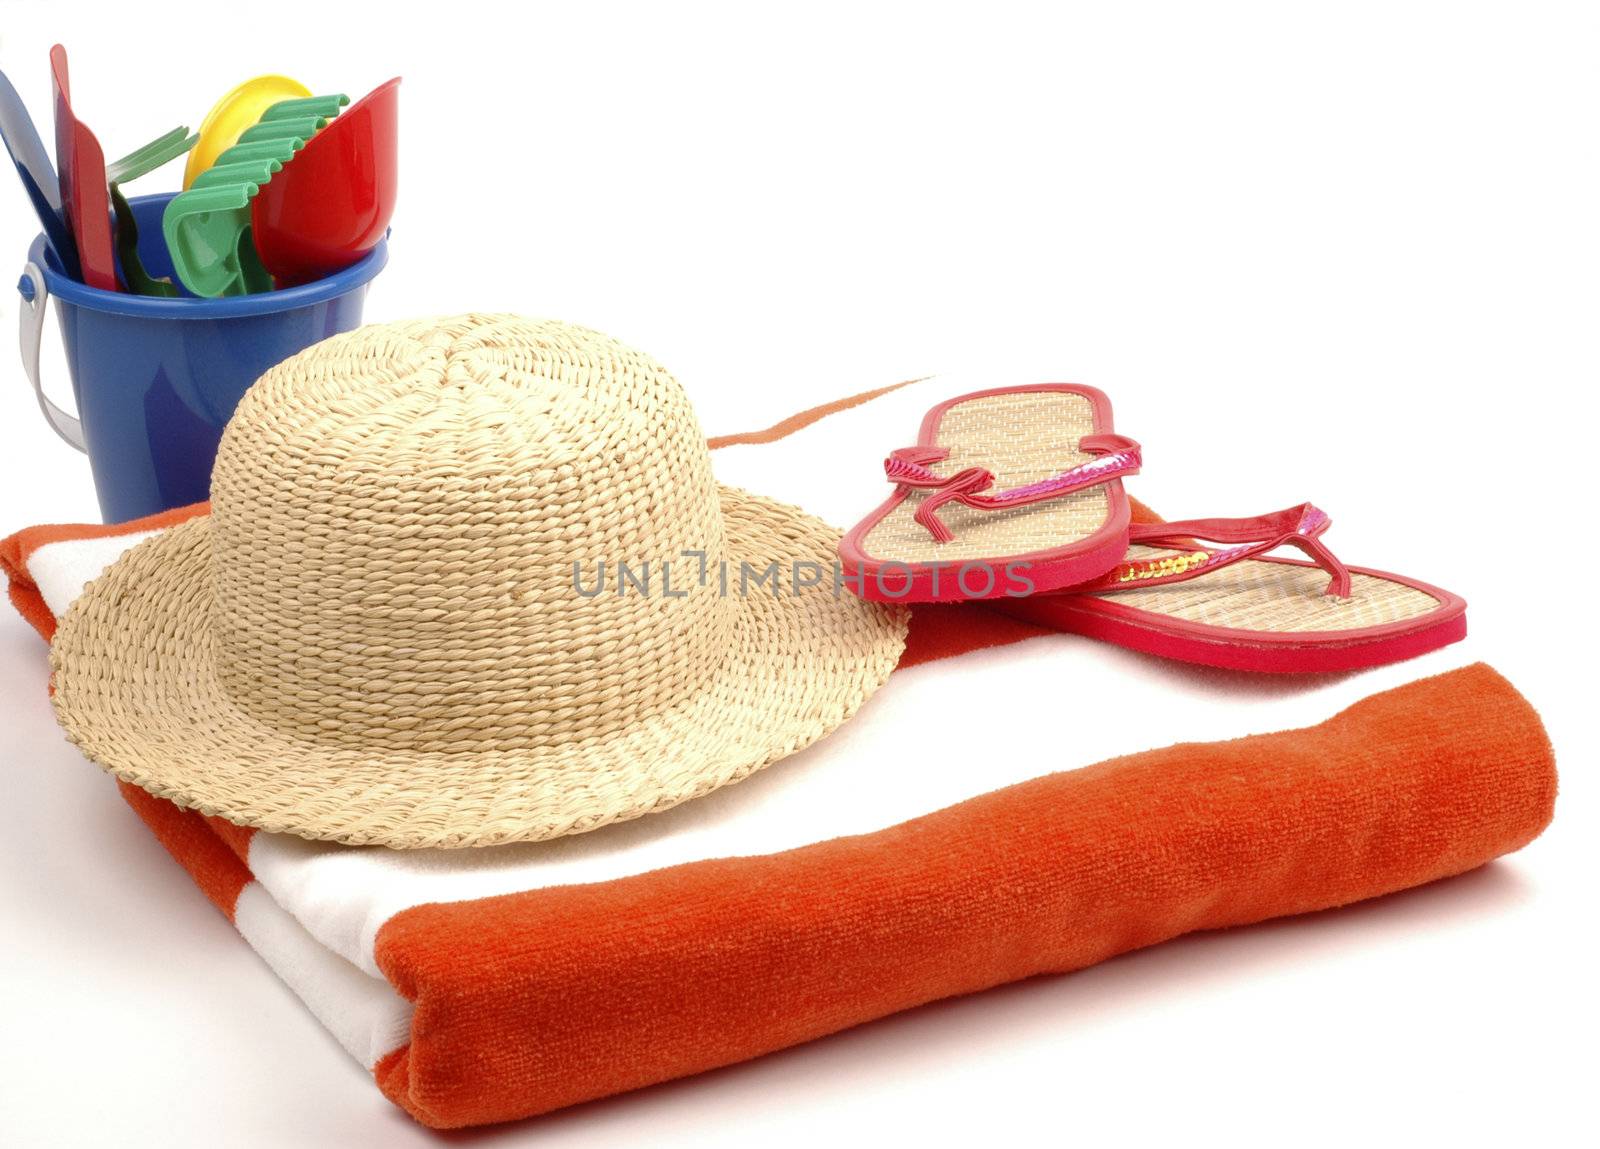 Items necessary for the beach on a white background.